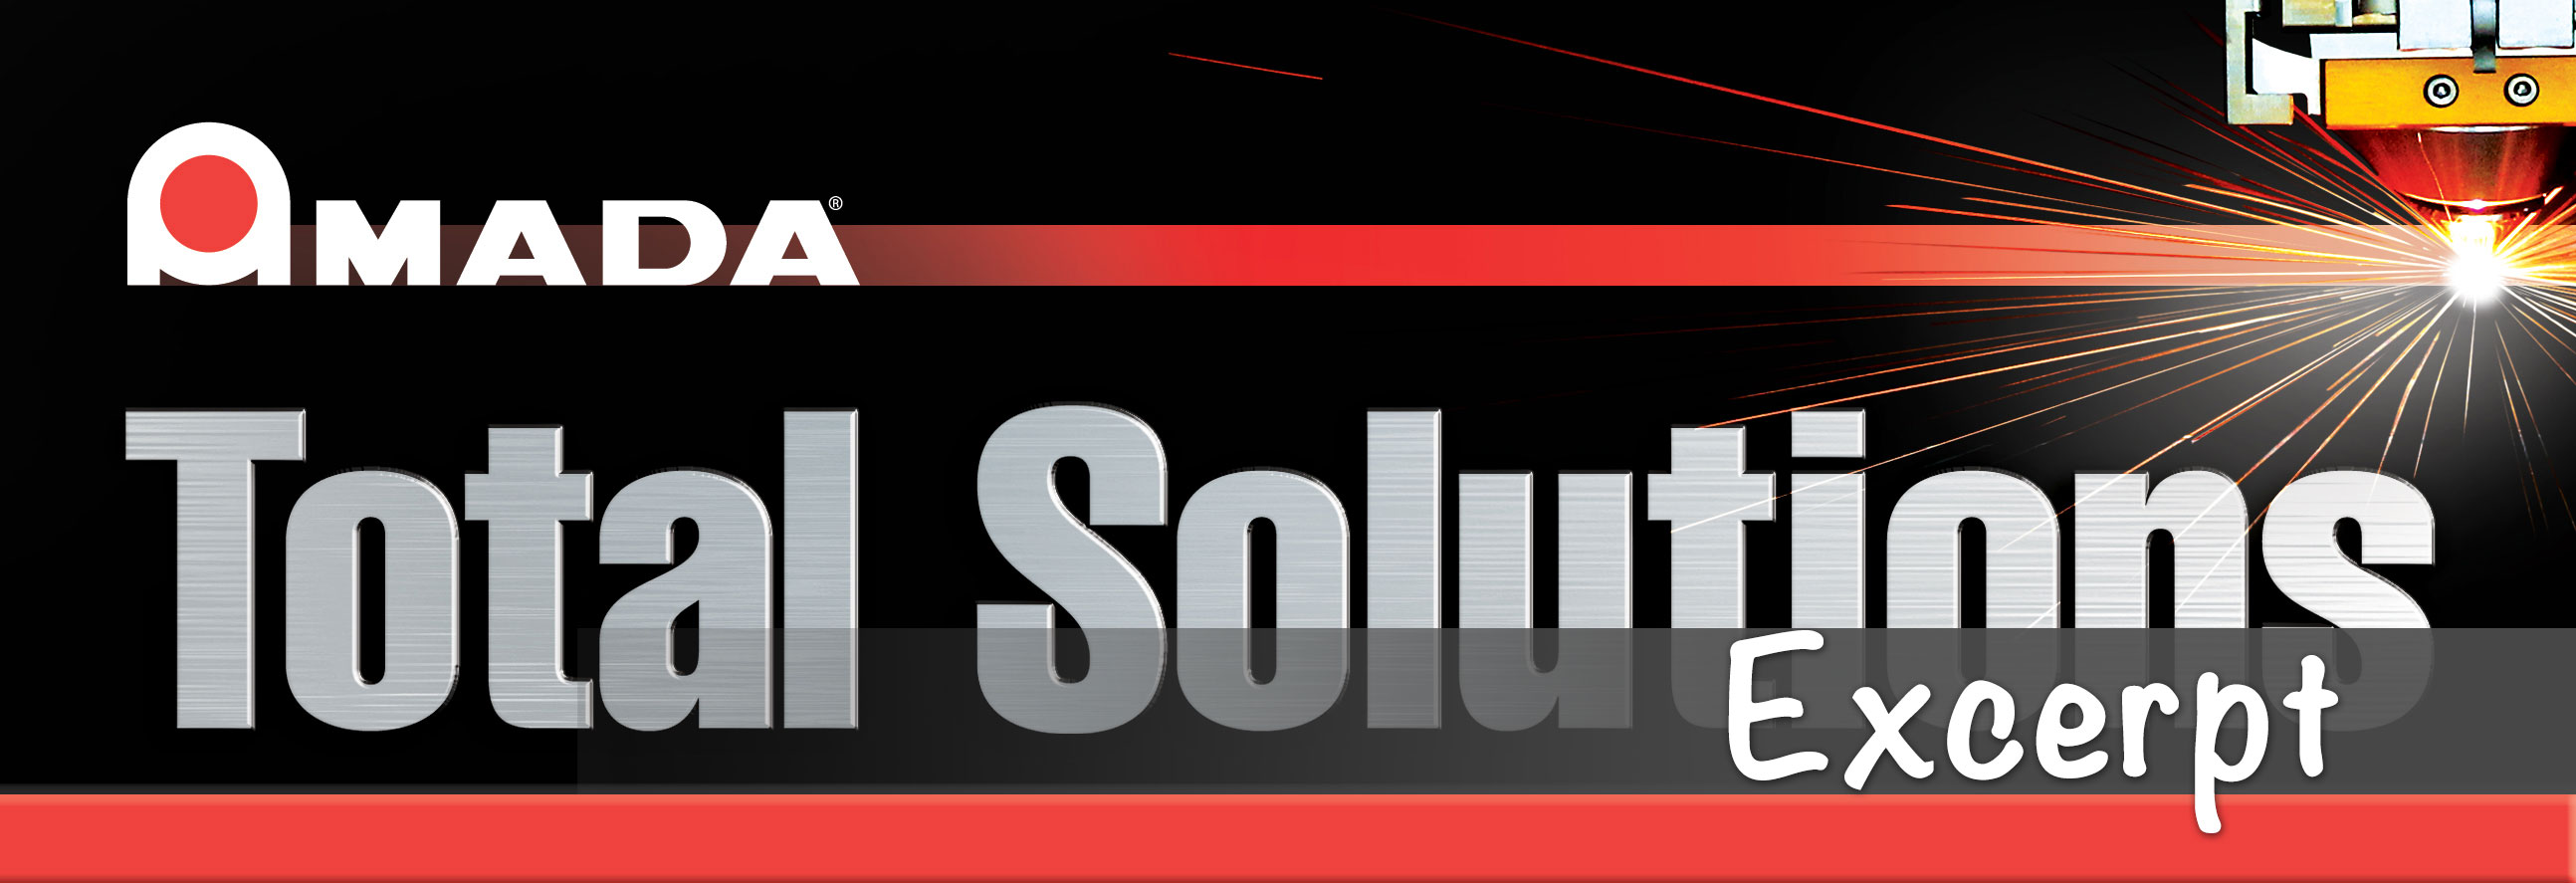 total solutions excerpts